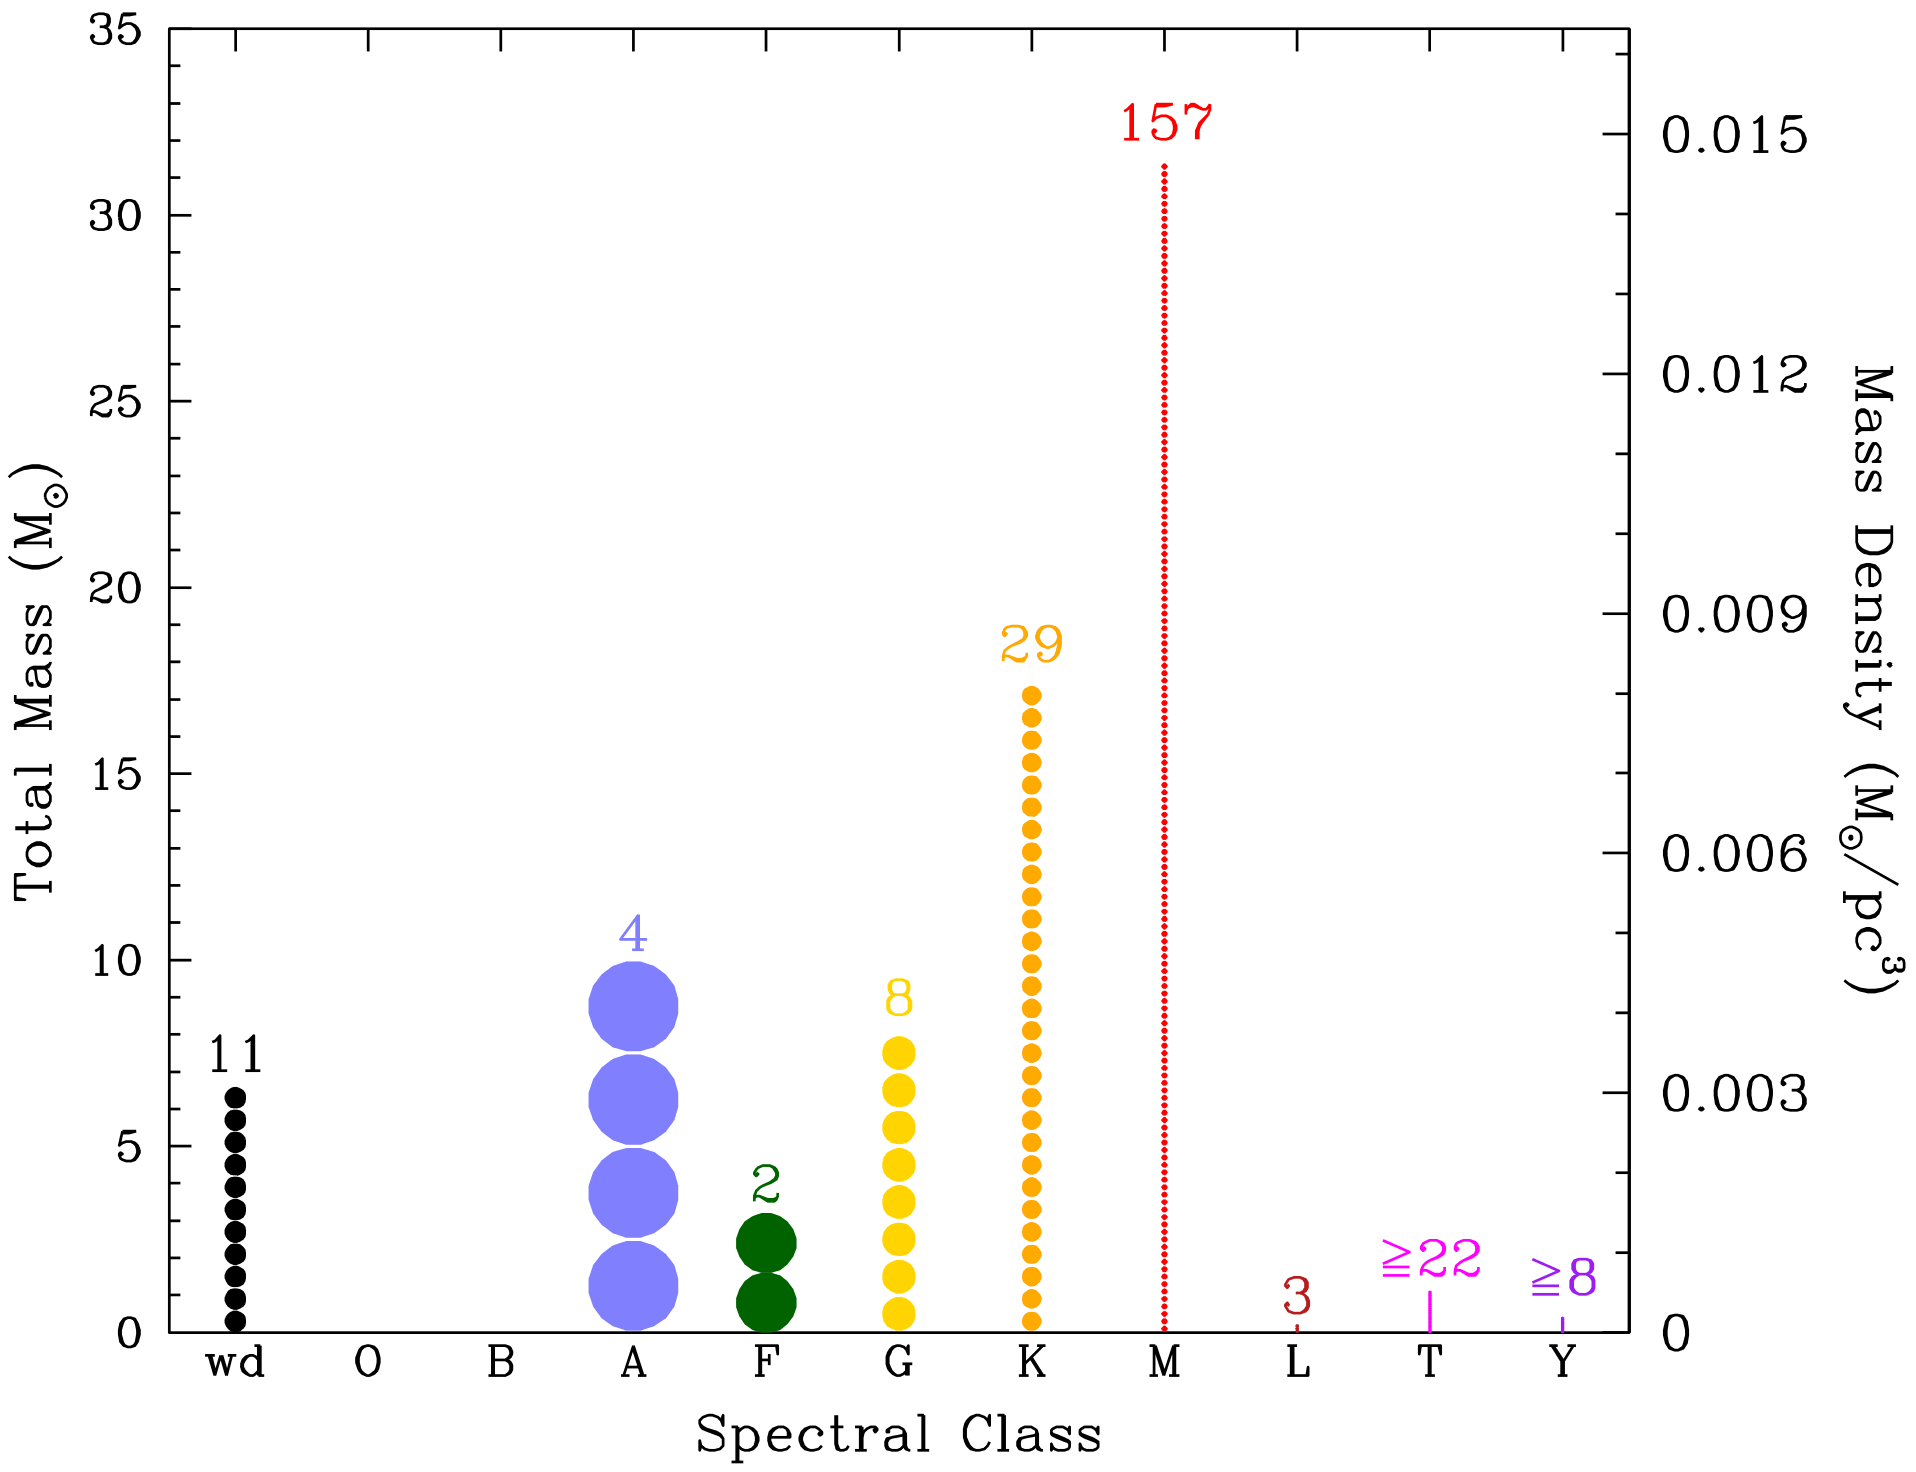 The 8pc sample as a function of spectral type plotted in three ways – as total mass (left axis), mass density (right axis), and histogram (numbers above each star stack)